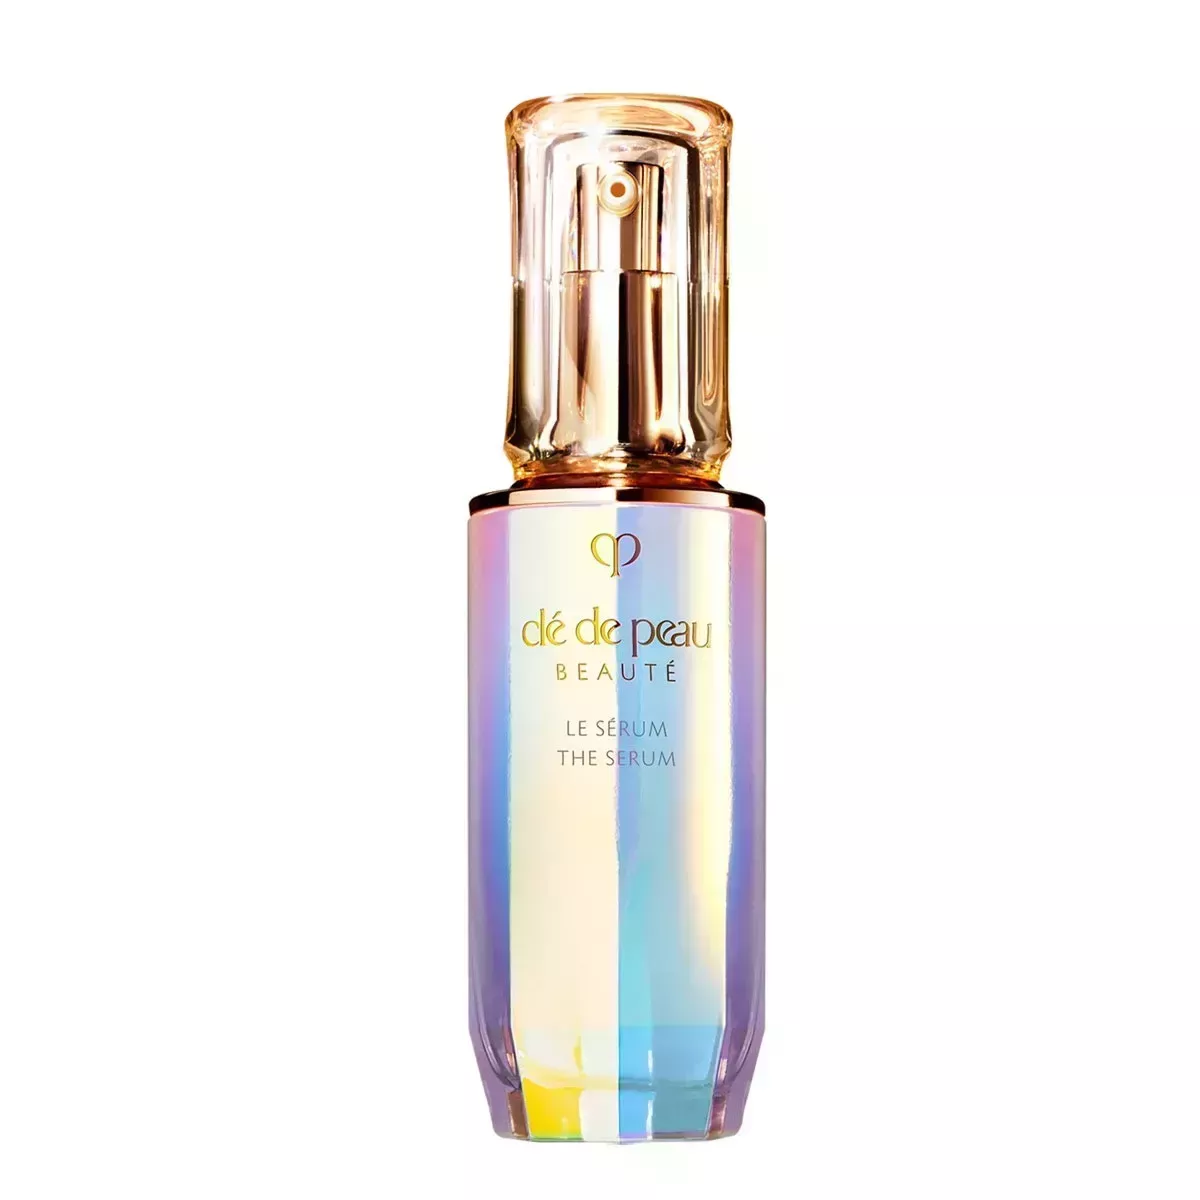 A glass bottle of facial serum with a gold cap 